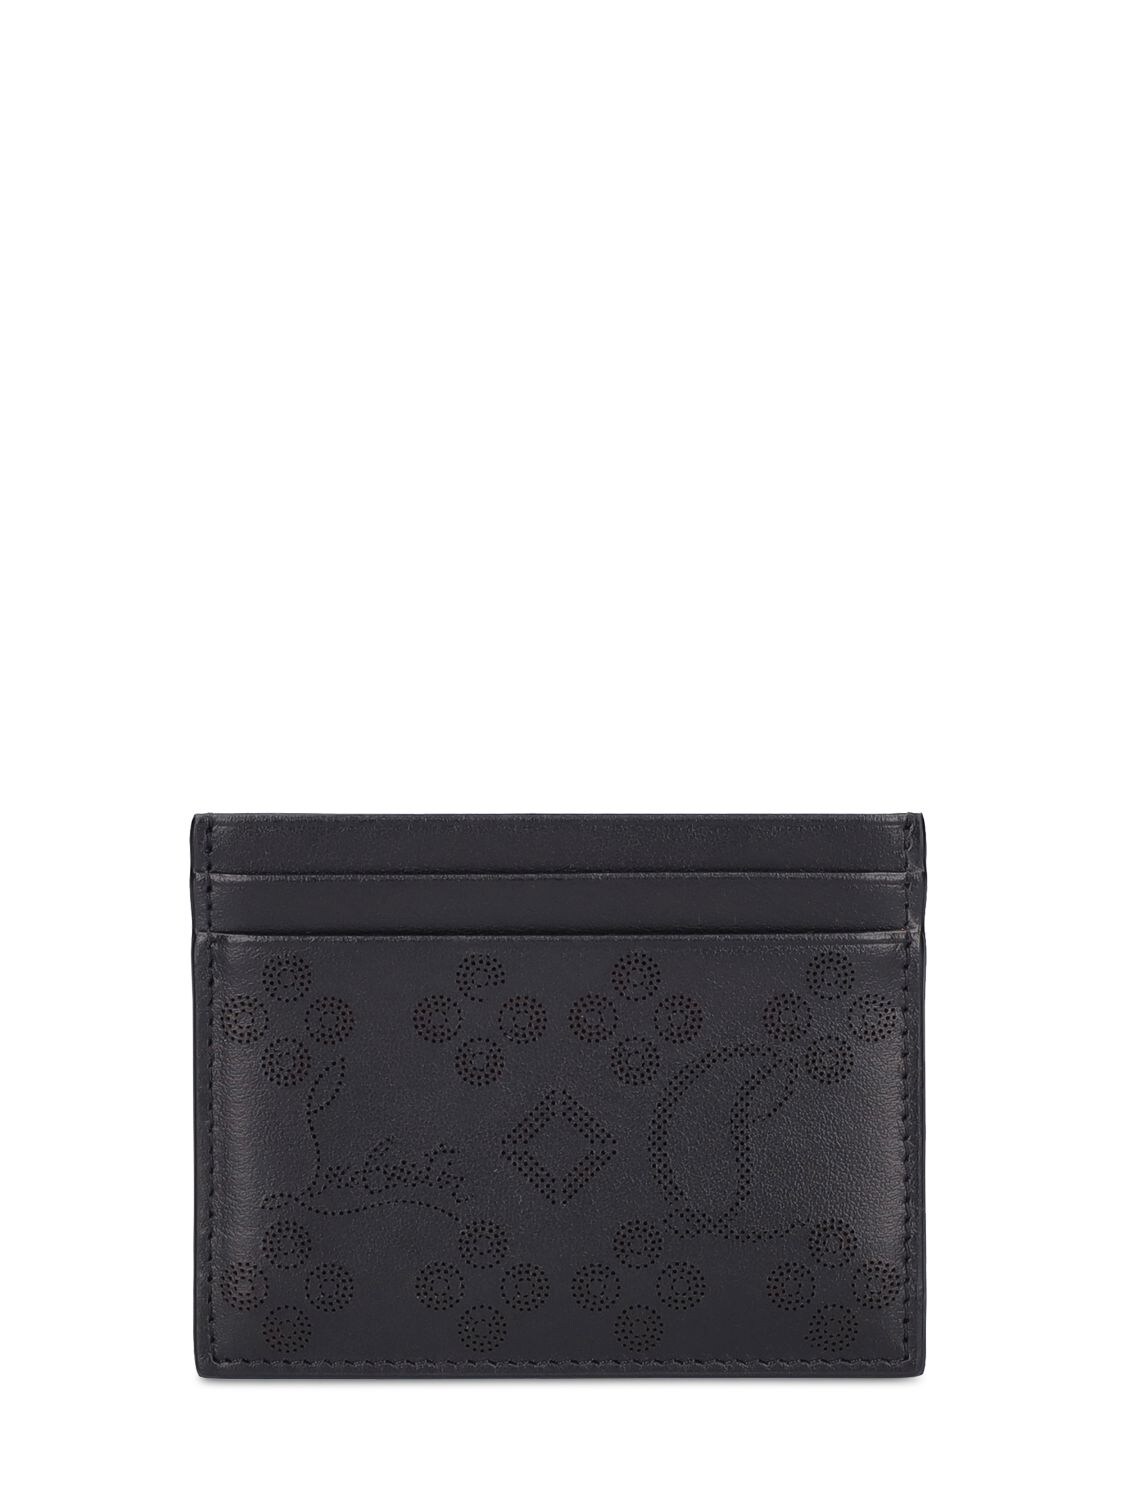 Image of W Kios Perforated Leather Card Holder